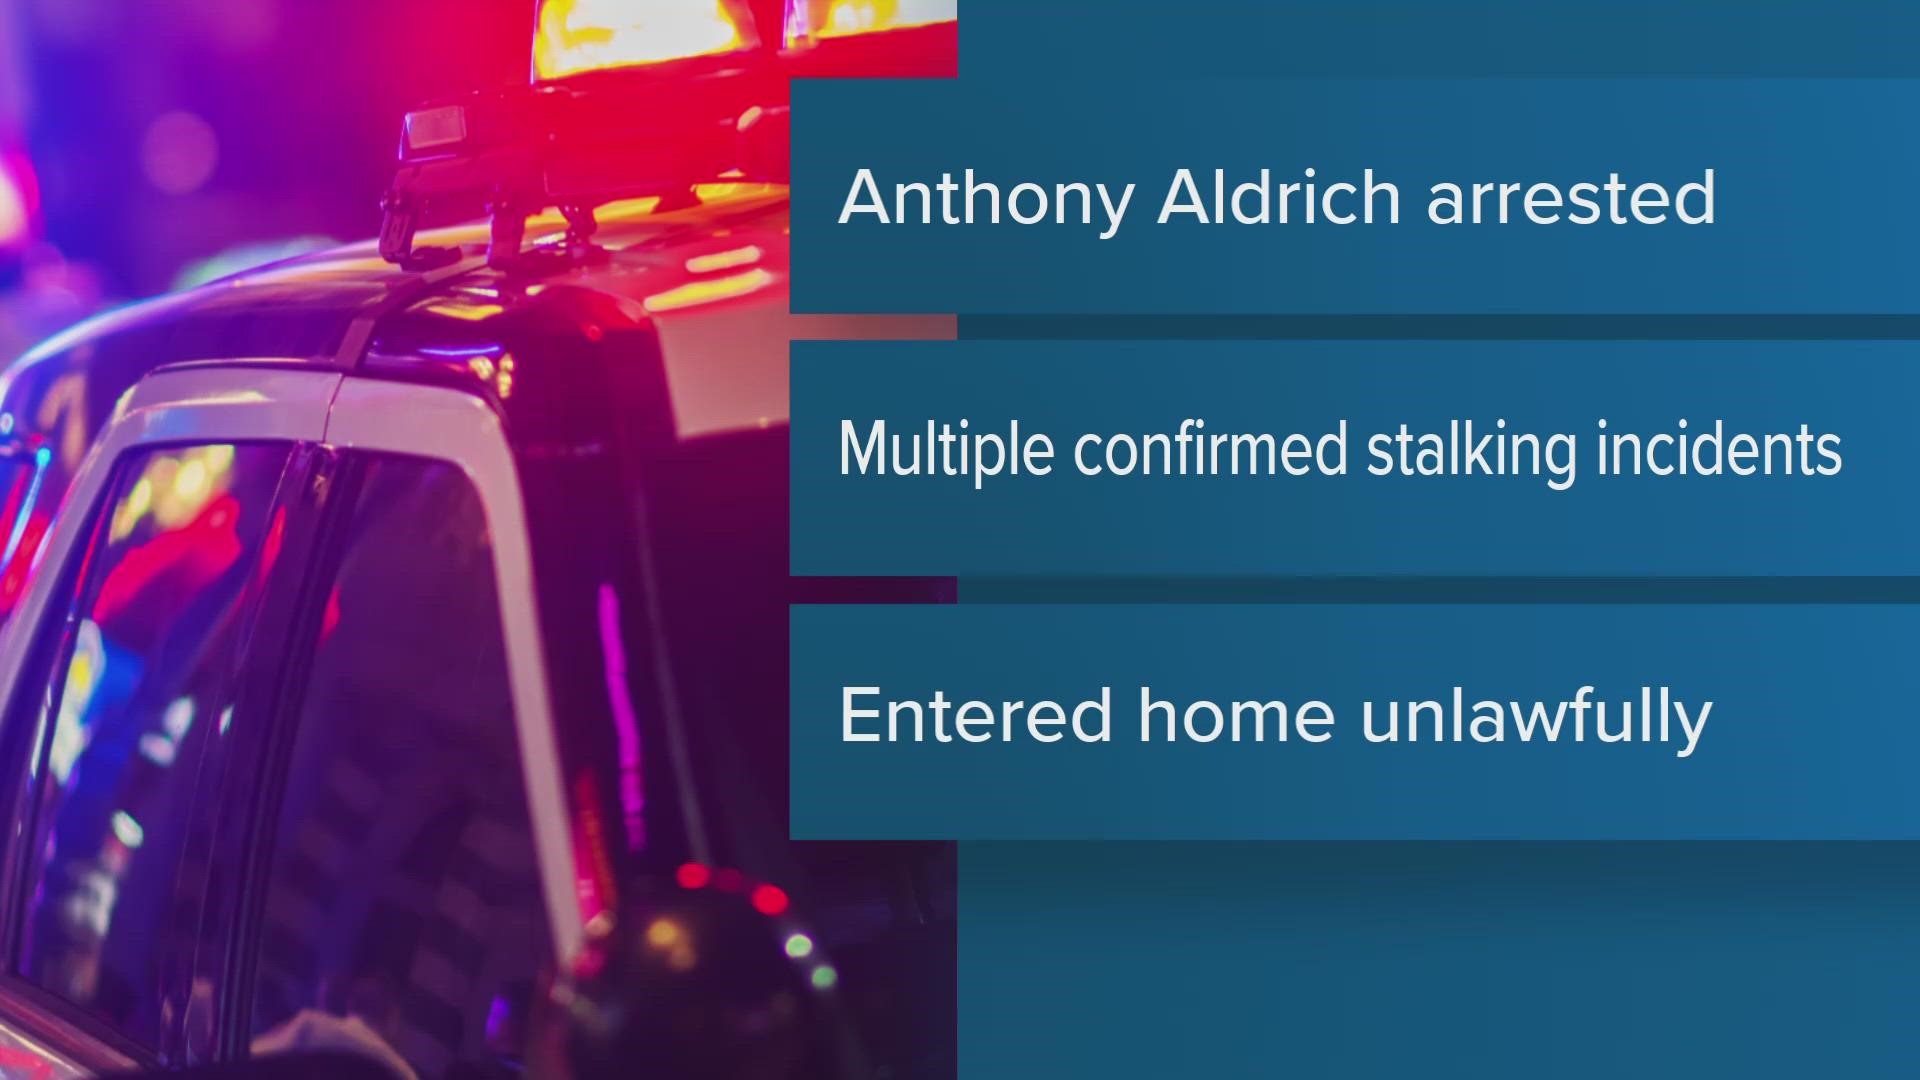 Anthony Aldrich reportedly followed a teenage girl to a Super Bowl party in Oxford and unlawfully entered the home. He has been accused of other stalking incidents.